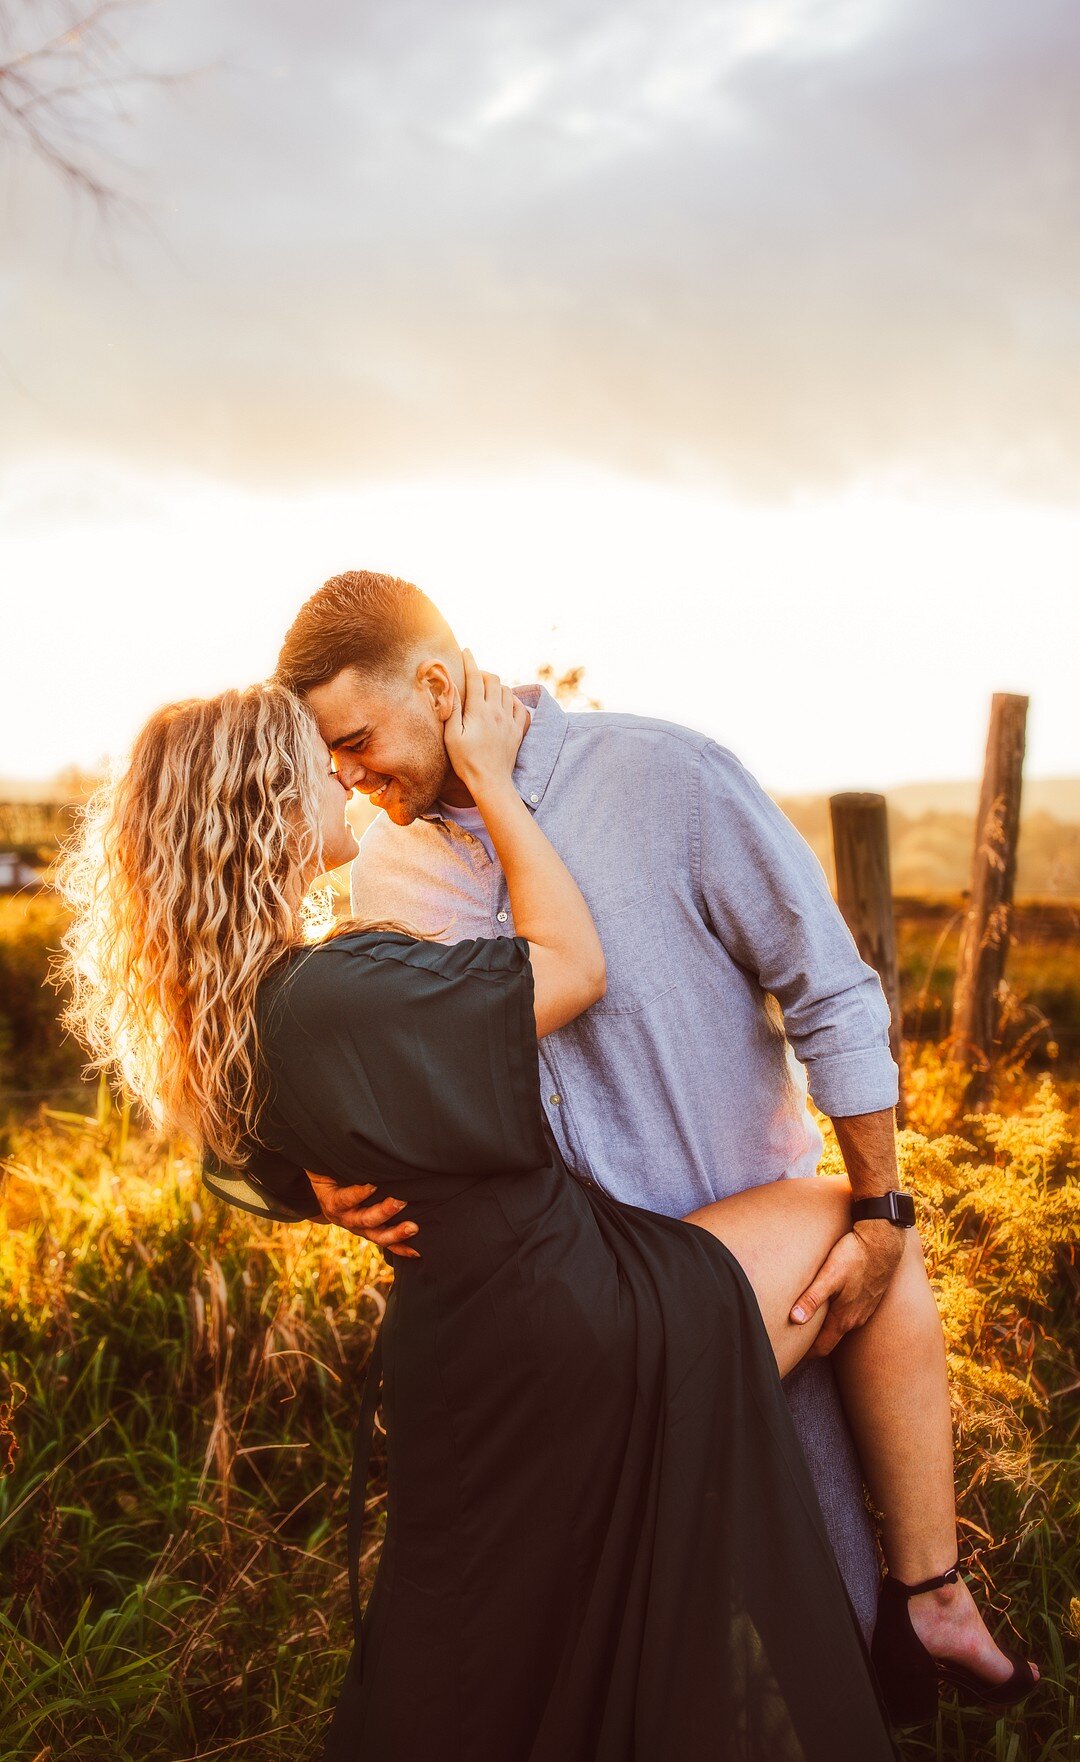 We are kicking off the Fall season with Tara and Tyler’s engagement session that has us dreaming of that Golden Hour just before sunset. Photography by Lydia Larson Photography in Rome, Pennsylvania